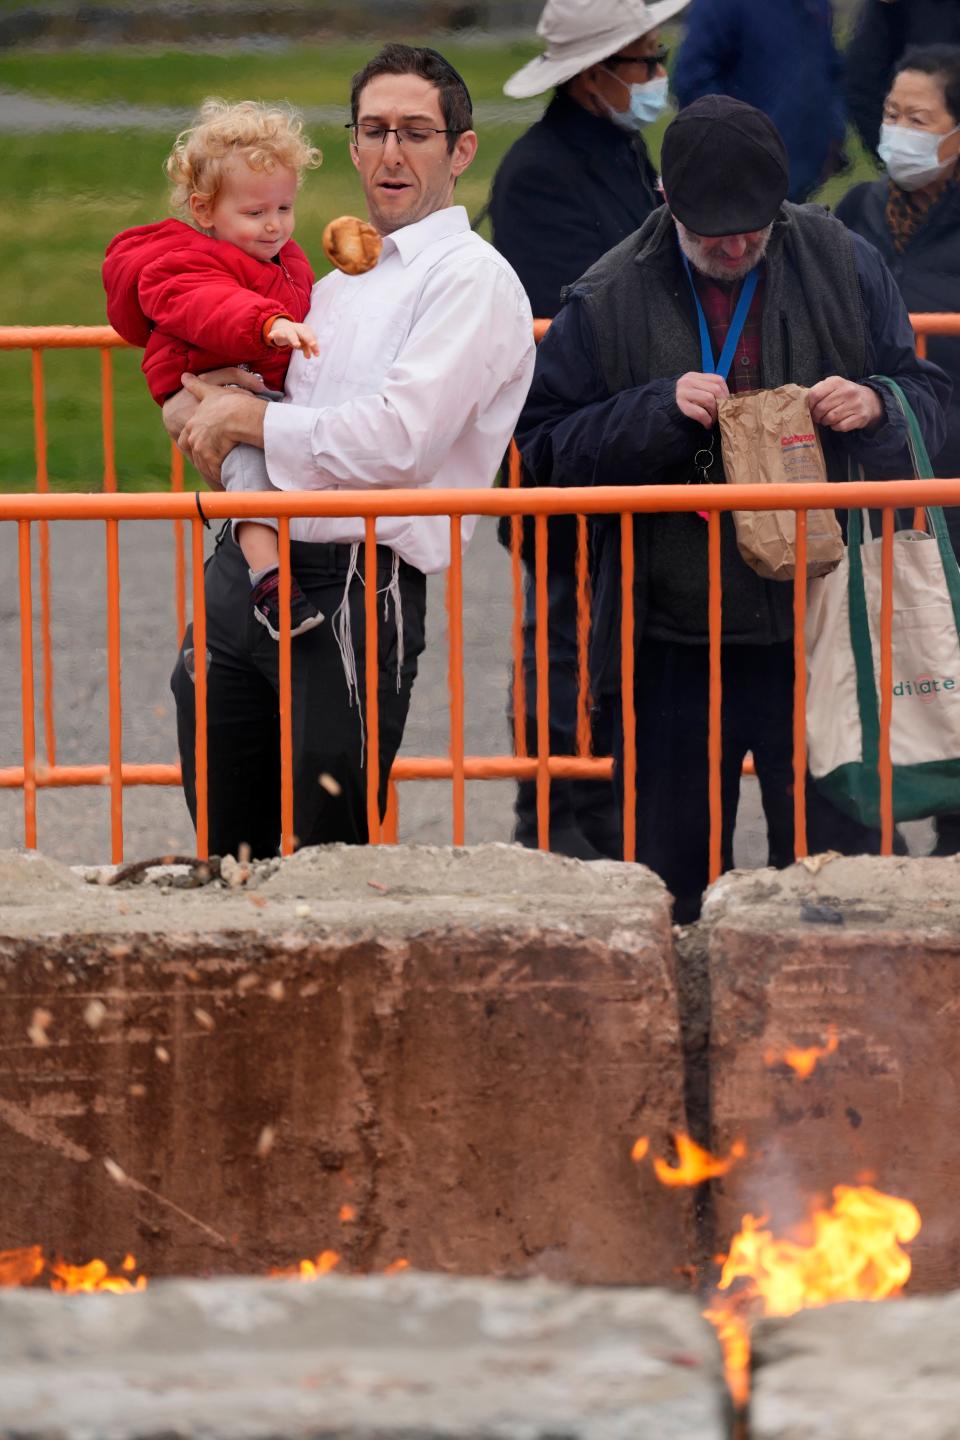 Avi Schwwartz, 2, is held by his father, David Schwartz, as he throws a roll of bread into the fire. Jews came to Third Ward Park, in Passaic, Wednesday morning for the burning of the chametz. Chametz is bread or any levened food, which is forbidden for Jews to have during Passover.  Passover starts Wednesday at sundown and lasts until sundown on April 13th. Wednesday, April 5, 2023 